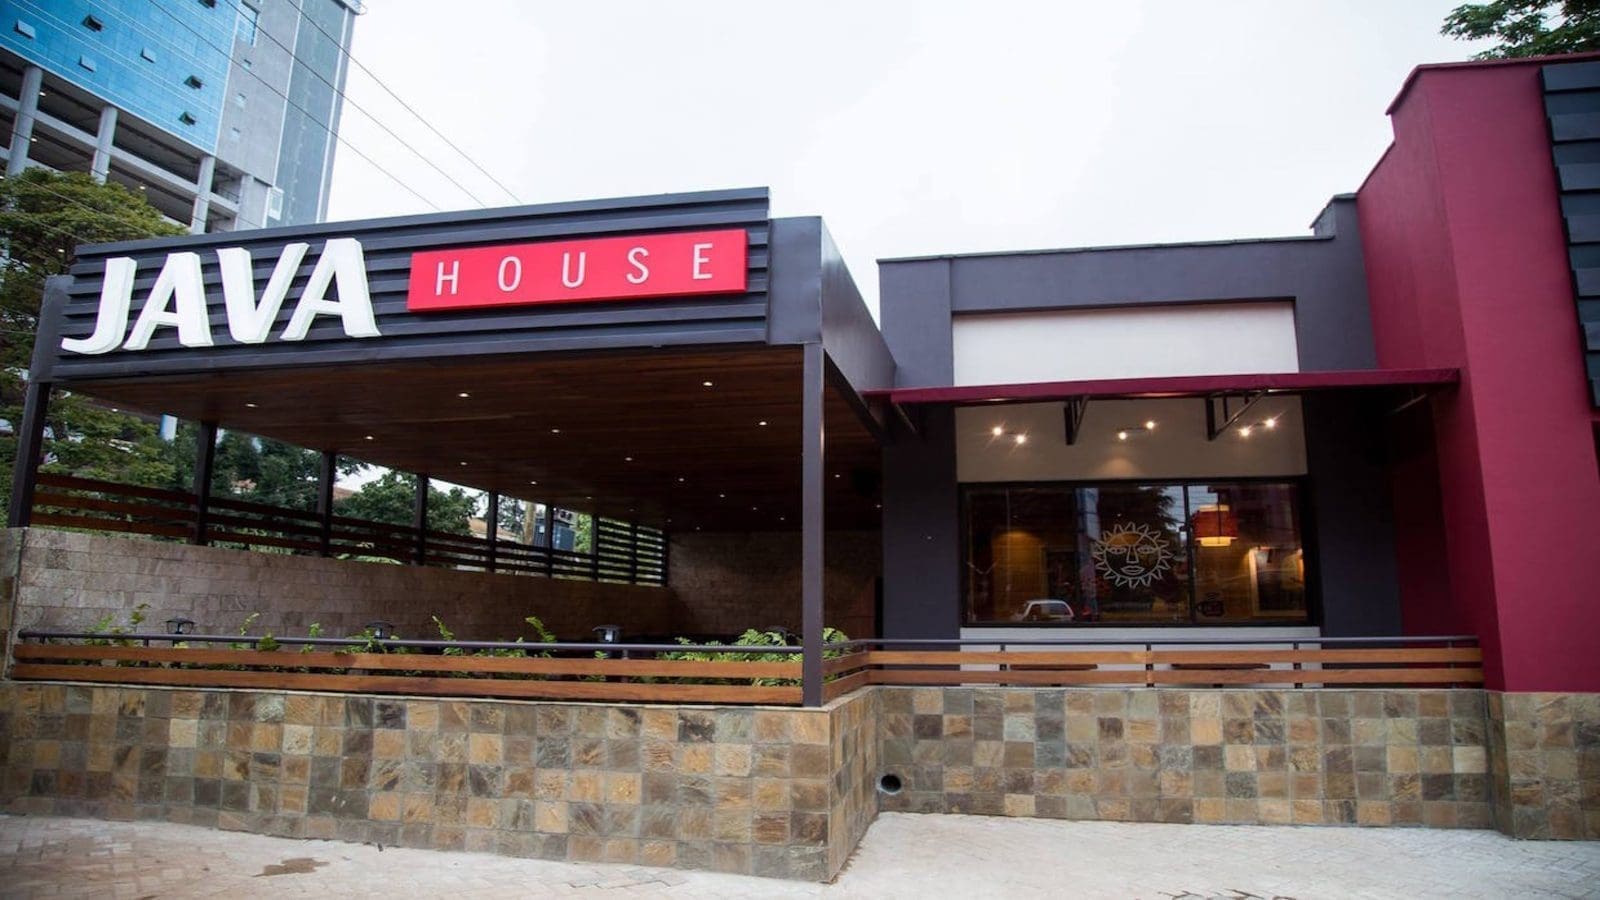 UK-based private equity fund Actis looks for potential buyer for Kenya’s biggest restaurant chain Java House